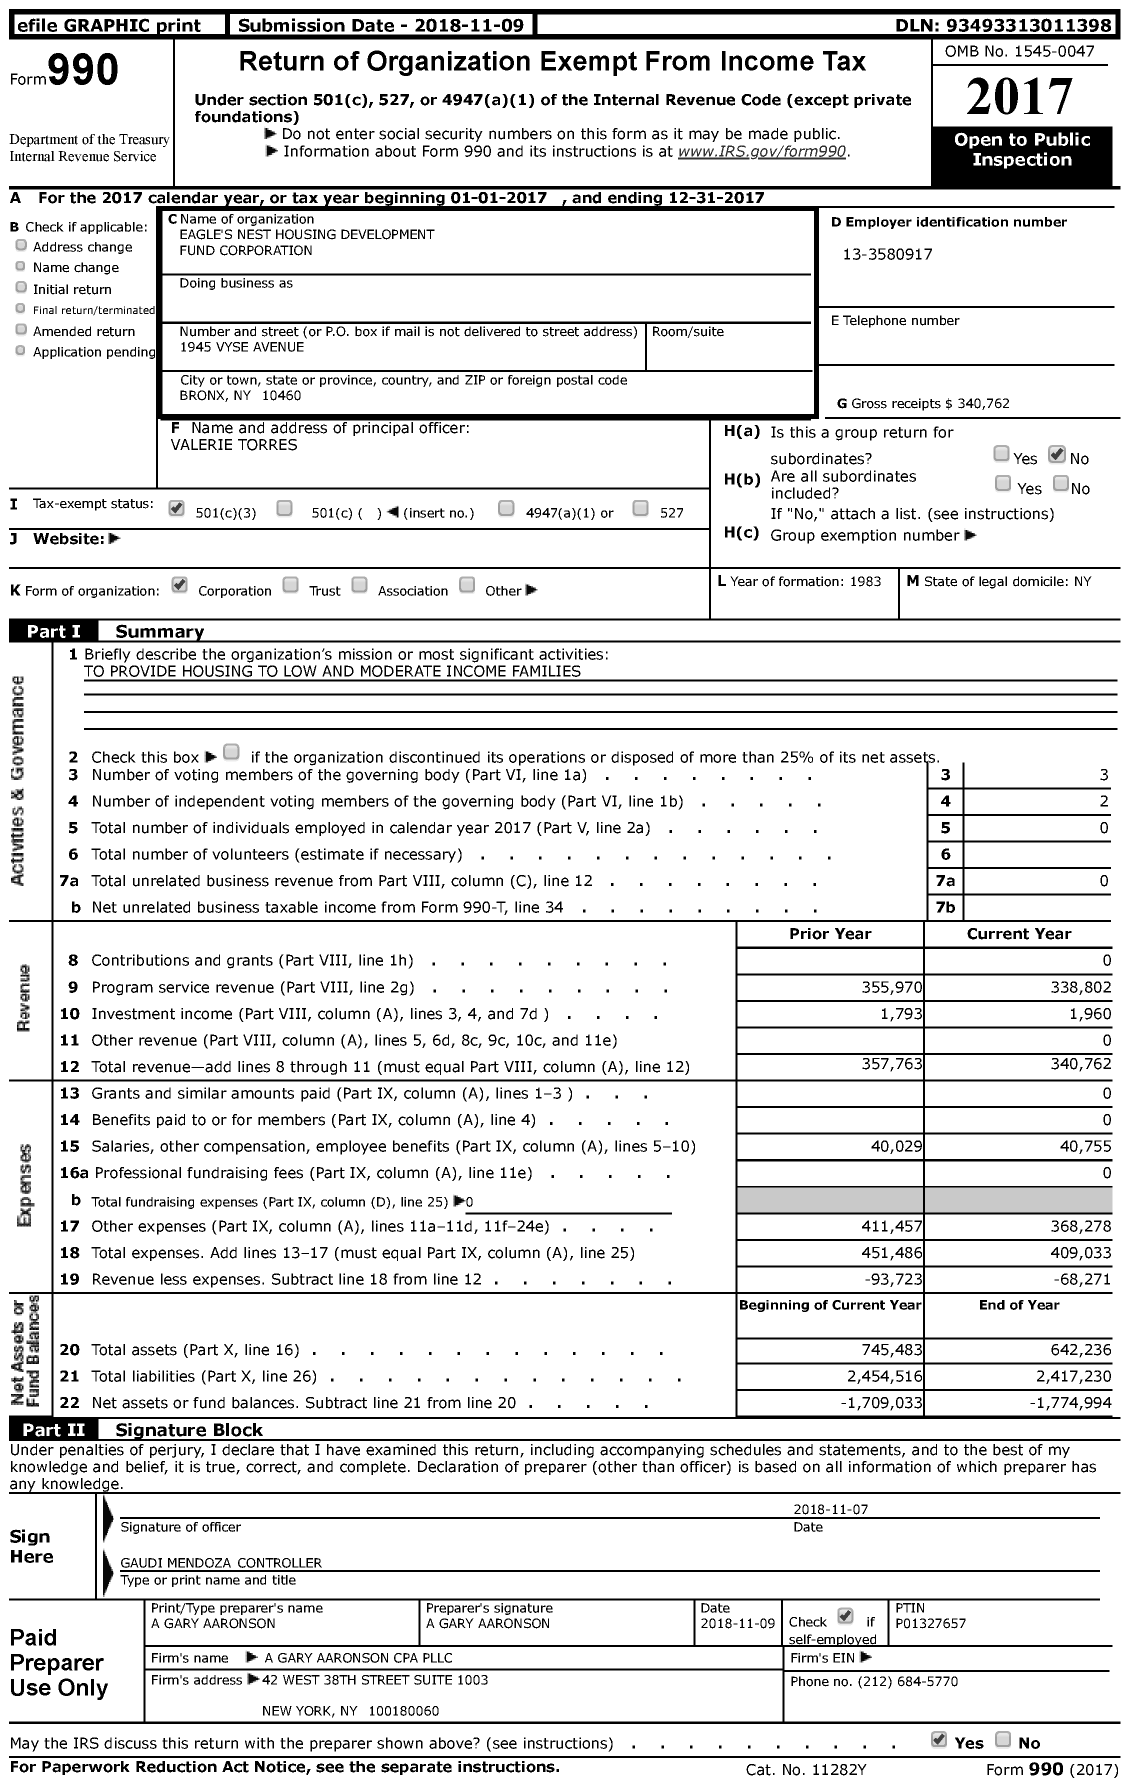 Image of first page of 2017 Form 990 for Eagle's Nest Housing Development Fund Corporation